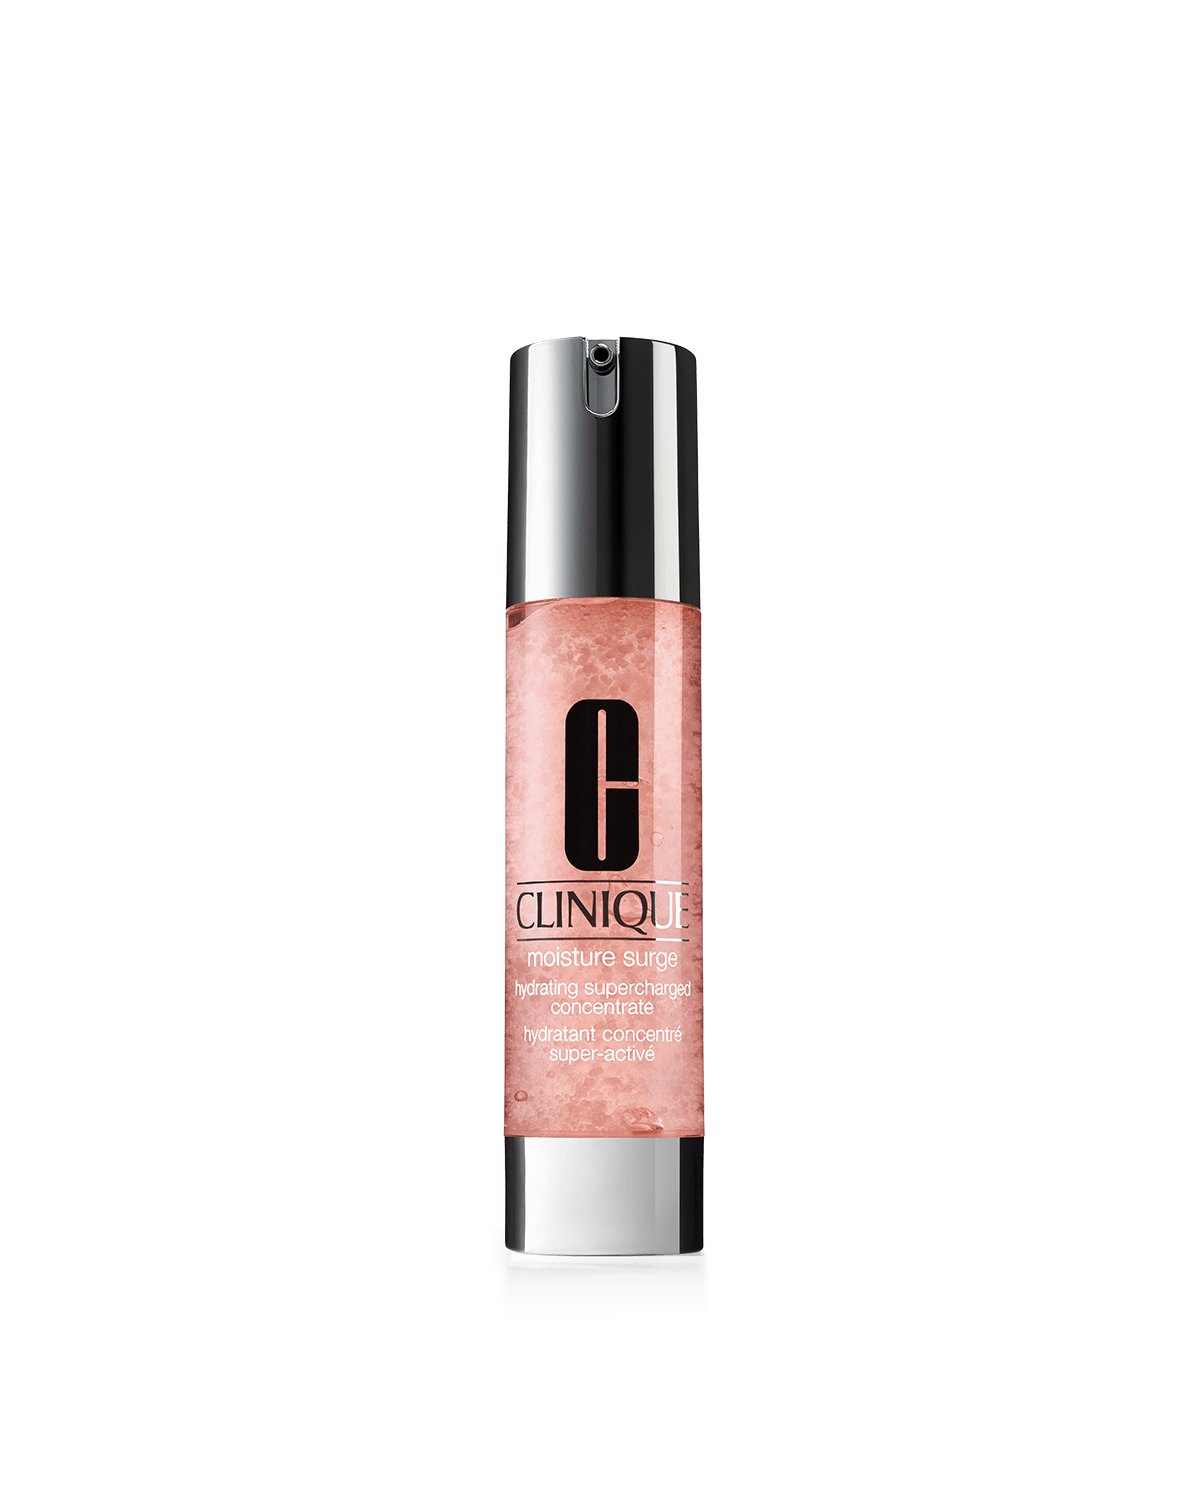 A clinique Moisture Surge™ Hydrating Supercharged Concentrate